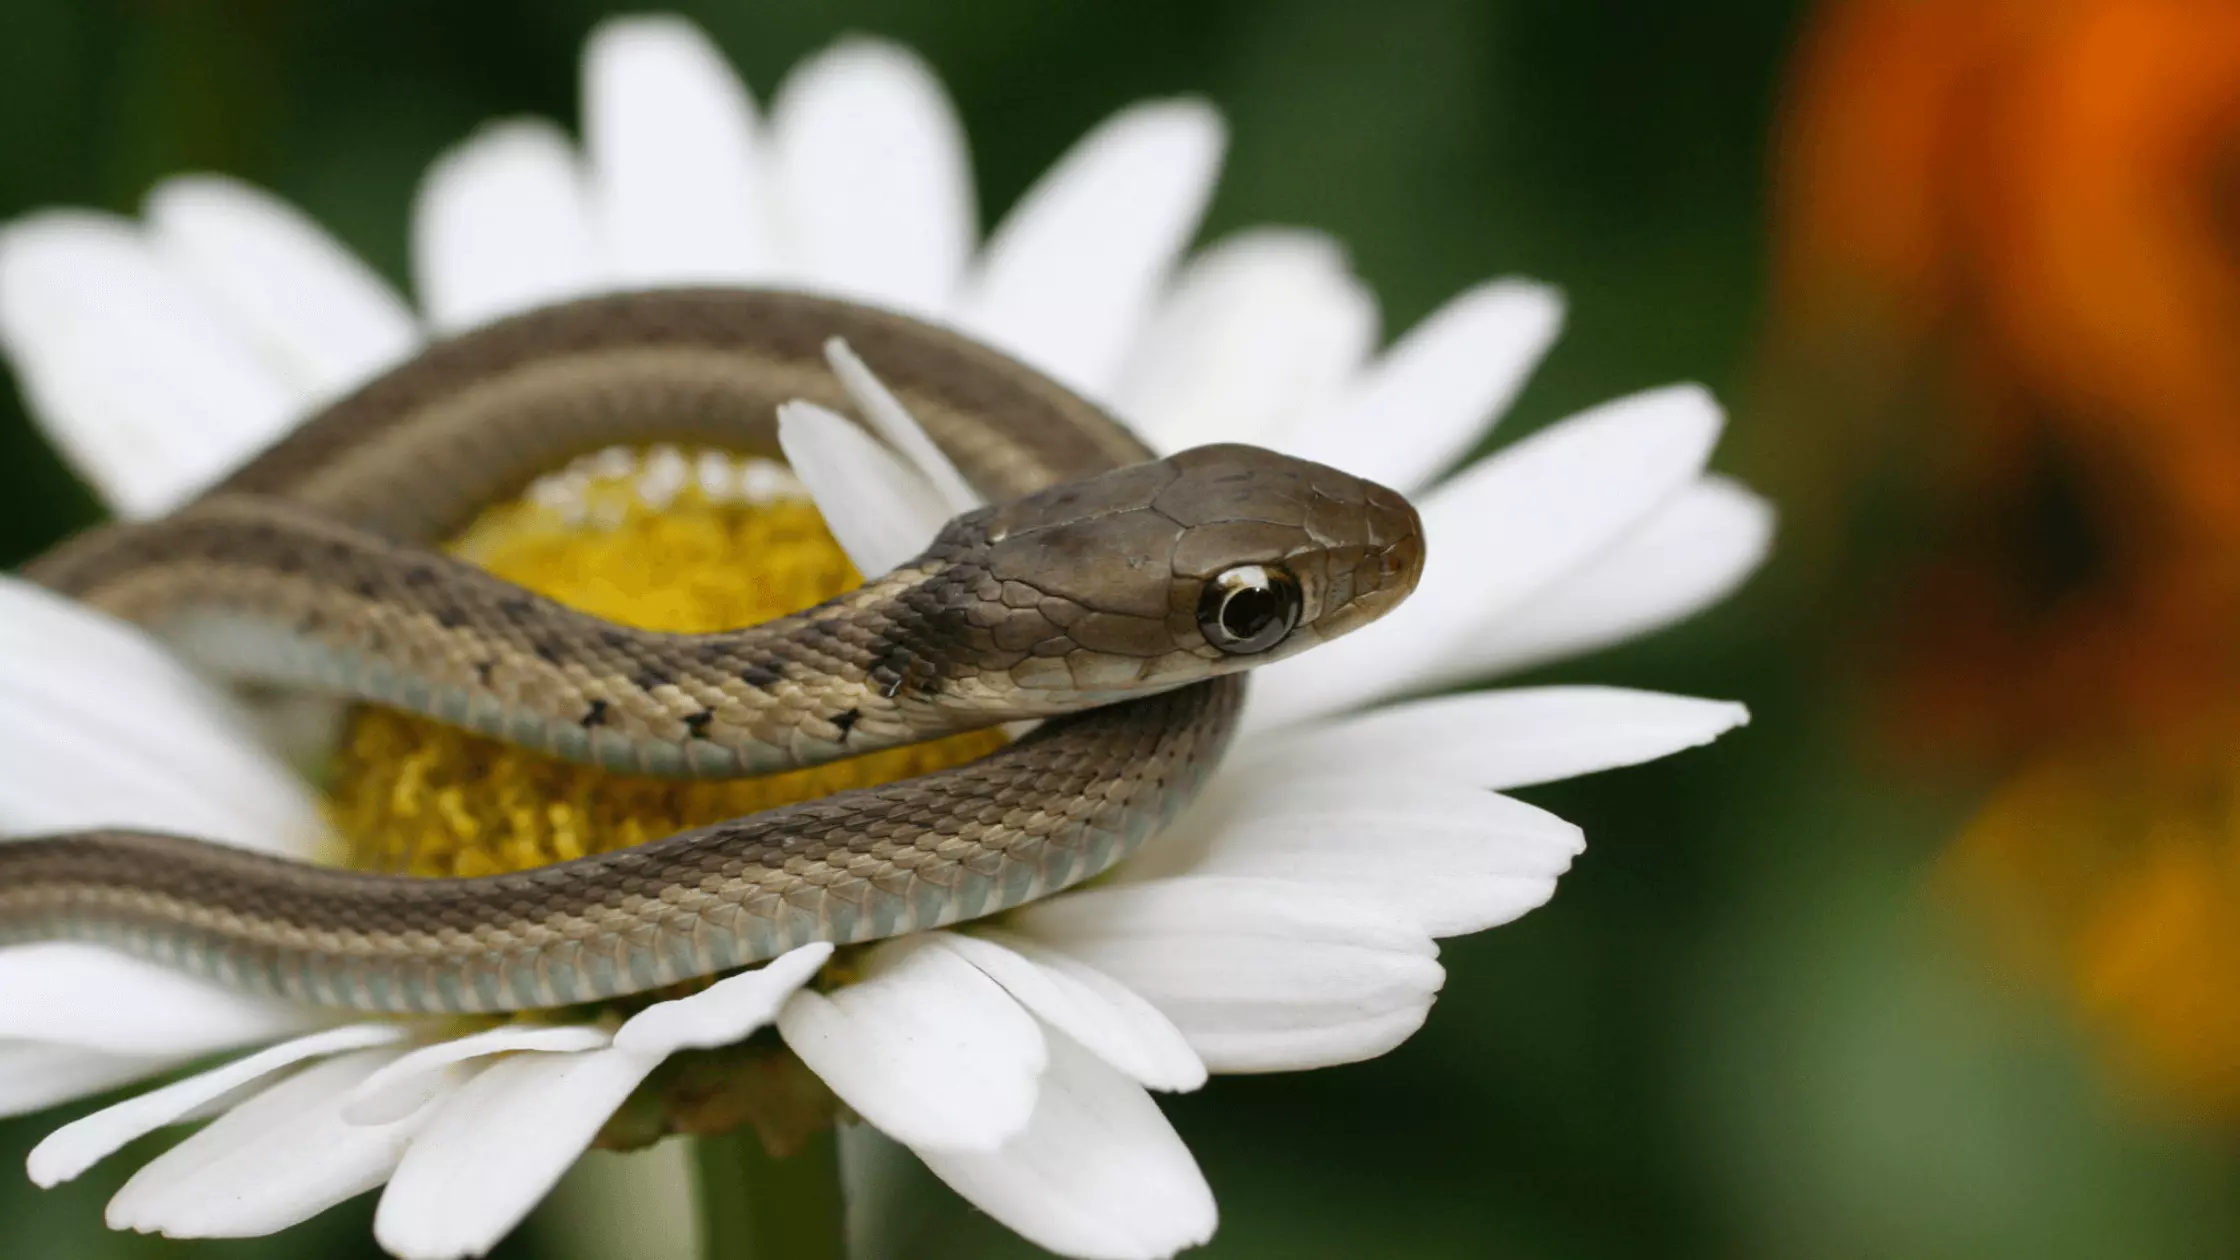 How To Take Care Of A Baby Garter Snake